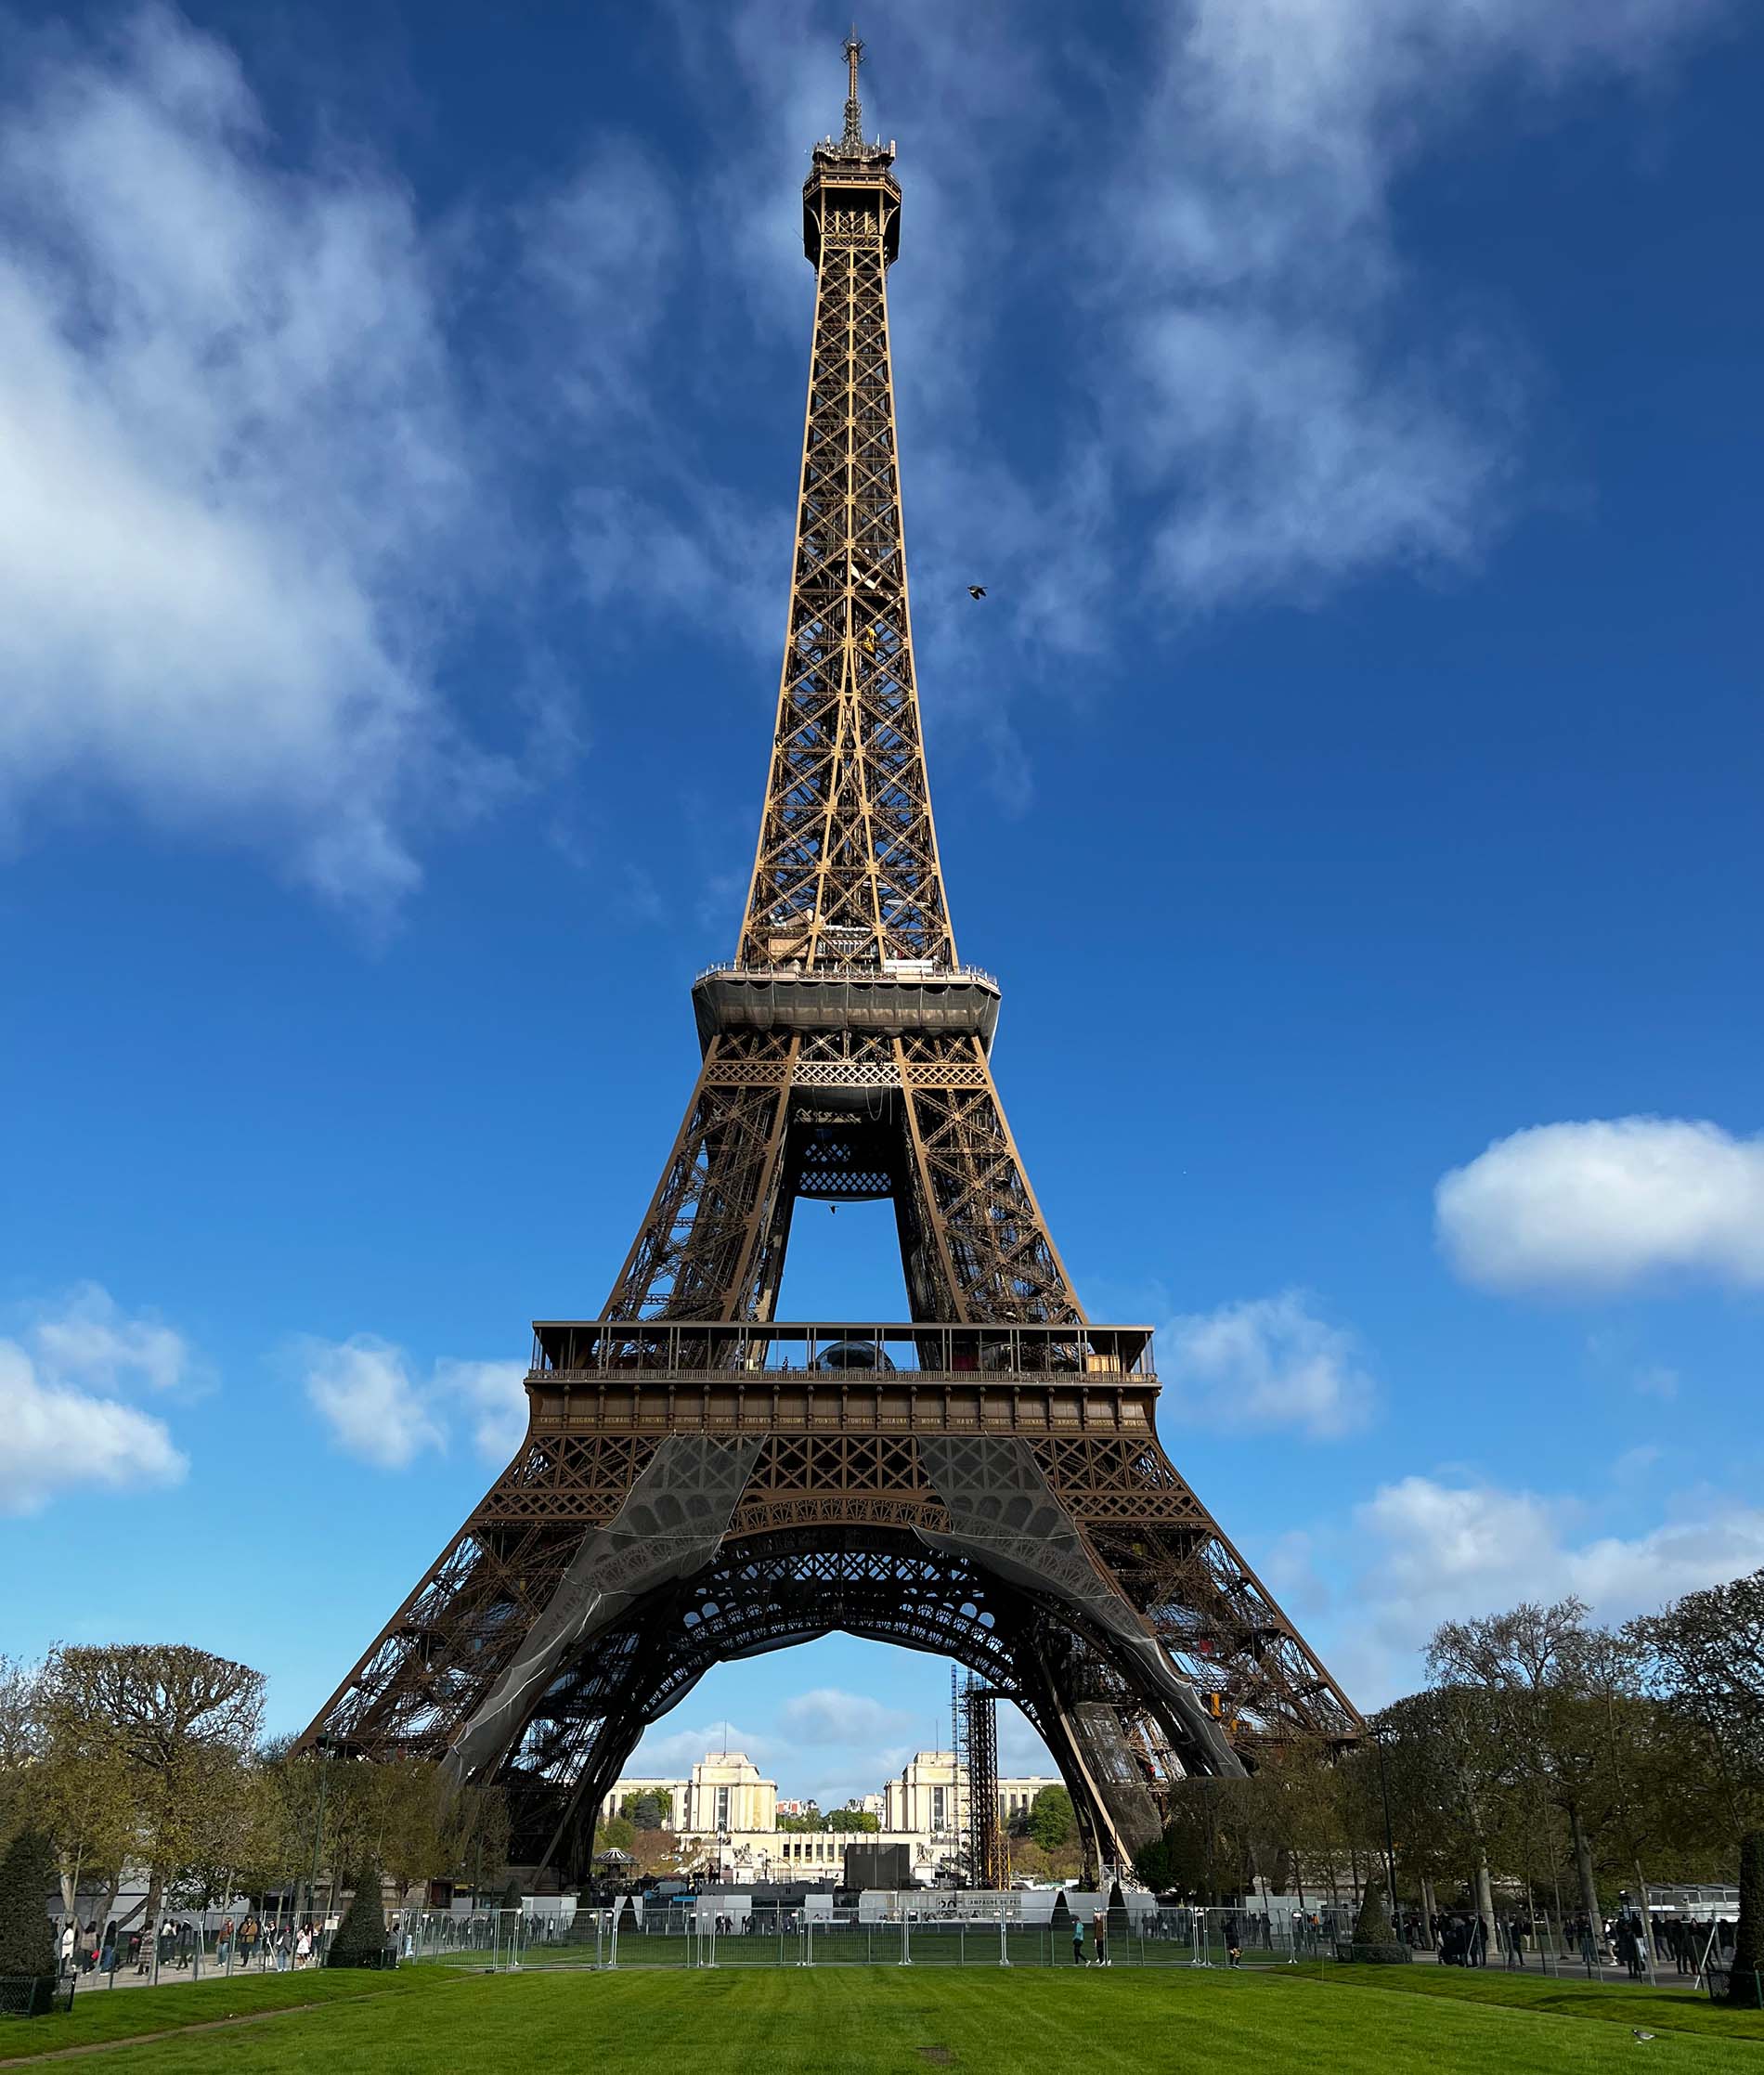 The Eiffel Tower, a tall open metalwork structure with sloping sides narrowing to a spire on top, with platforms on several levels, standing at the end of a large green field. Photo Credit Susan Brkich ’86.